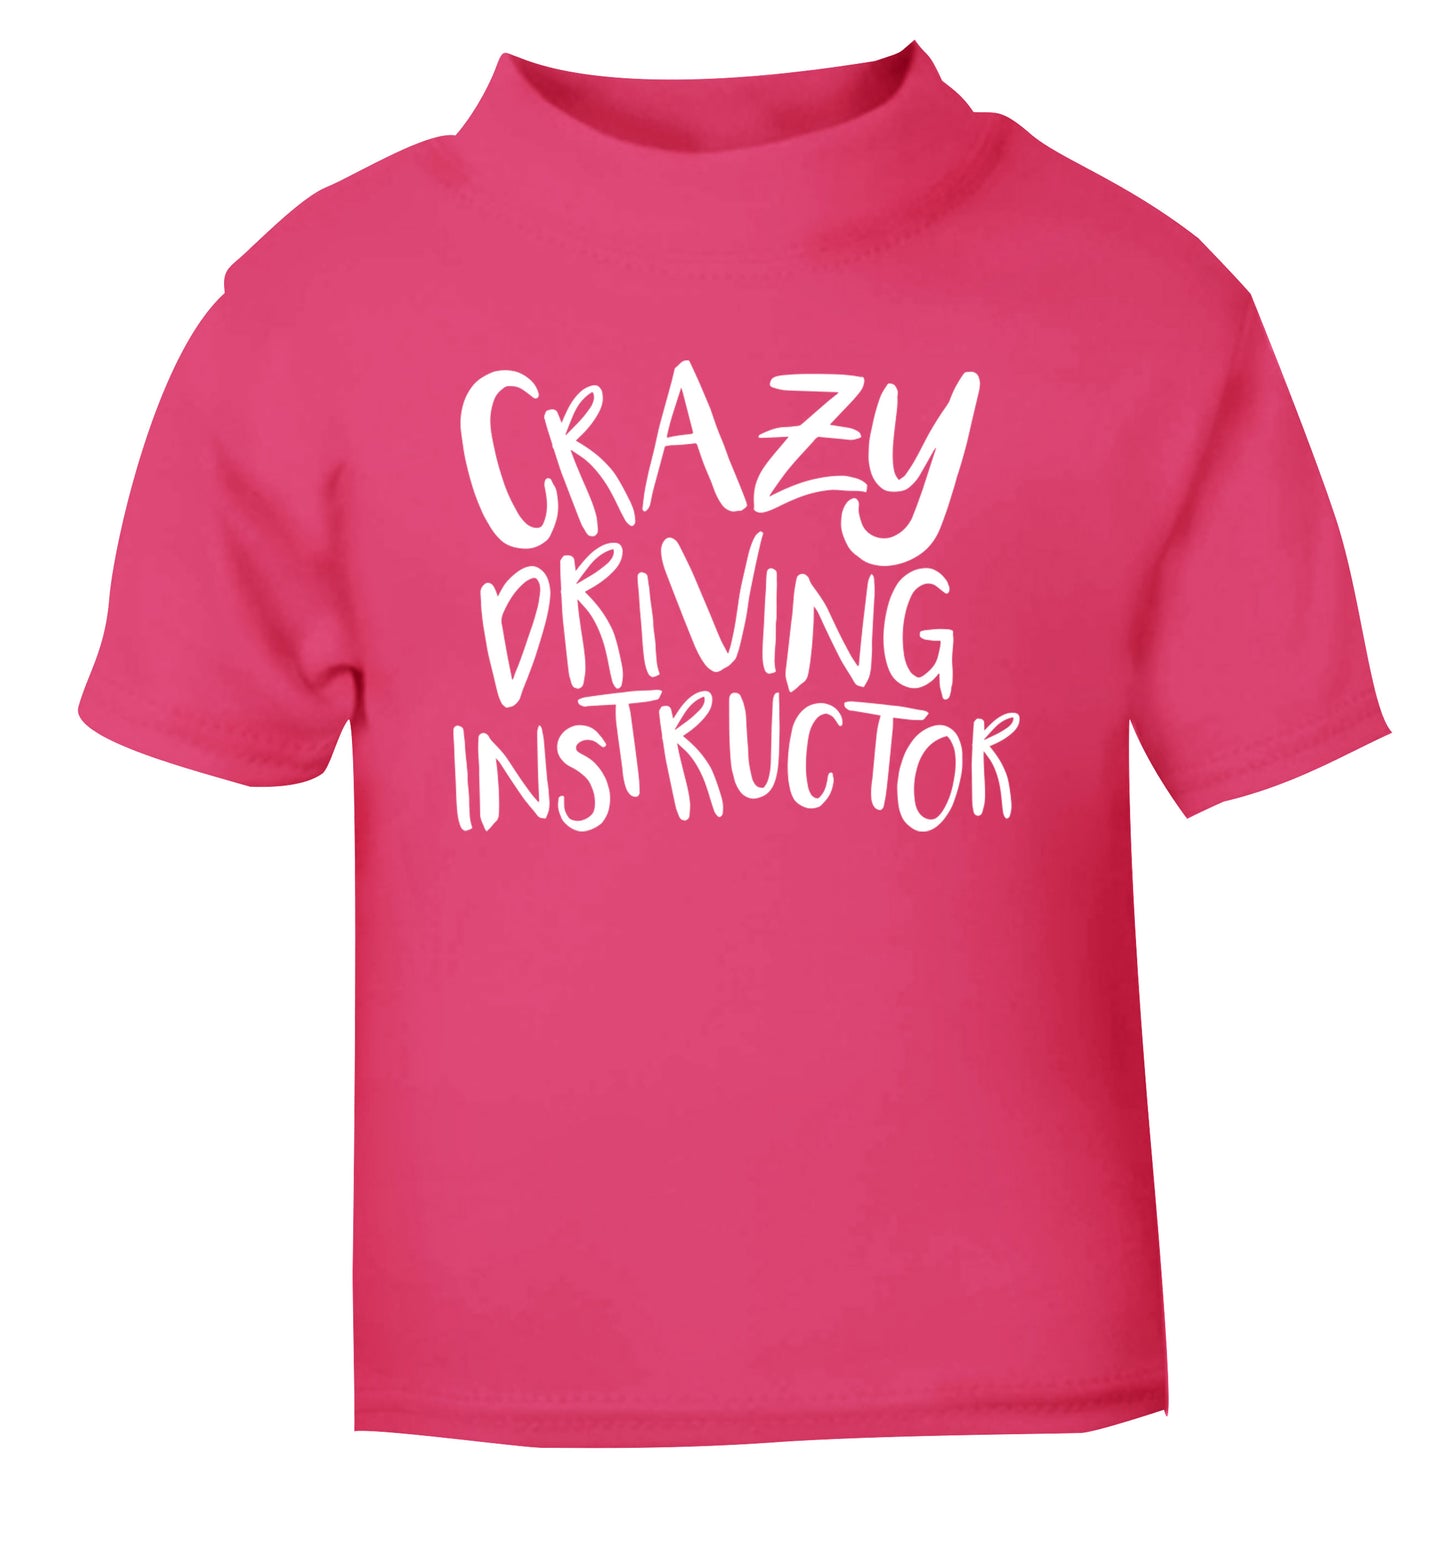 Crazy driving instructor pink Baby Toddler Tshirt 2 Years